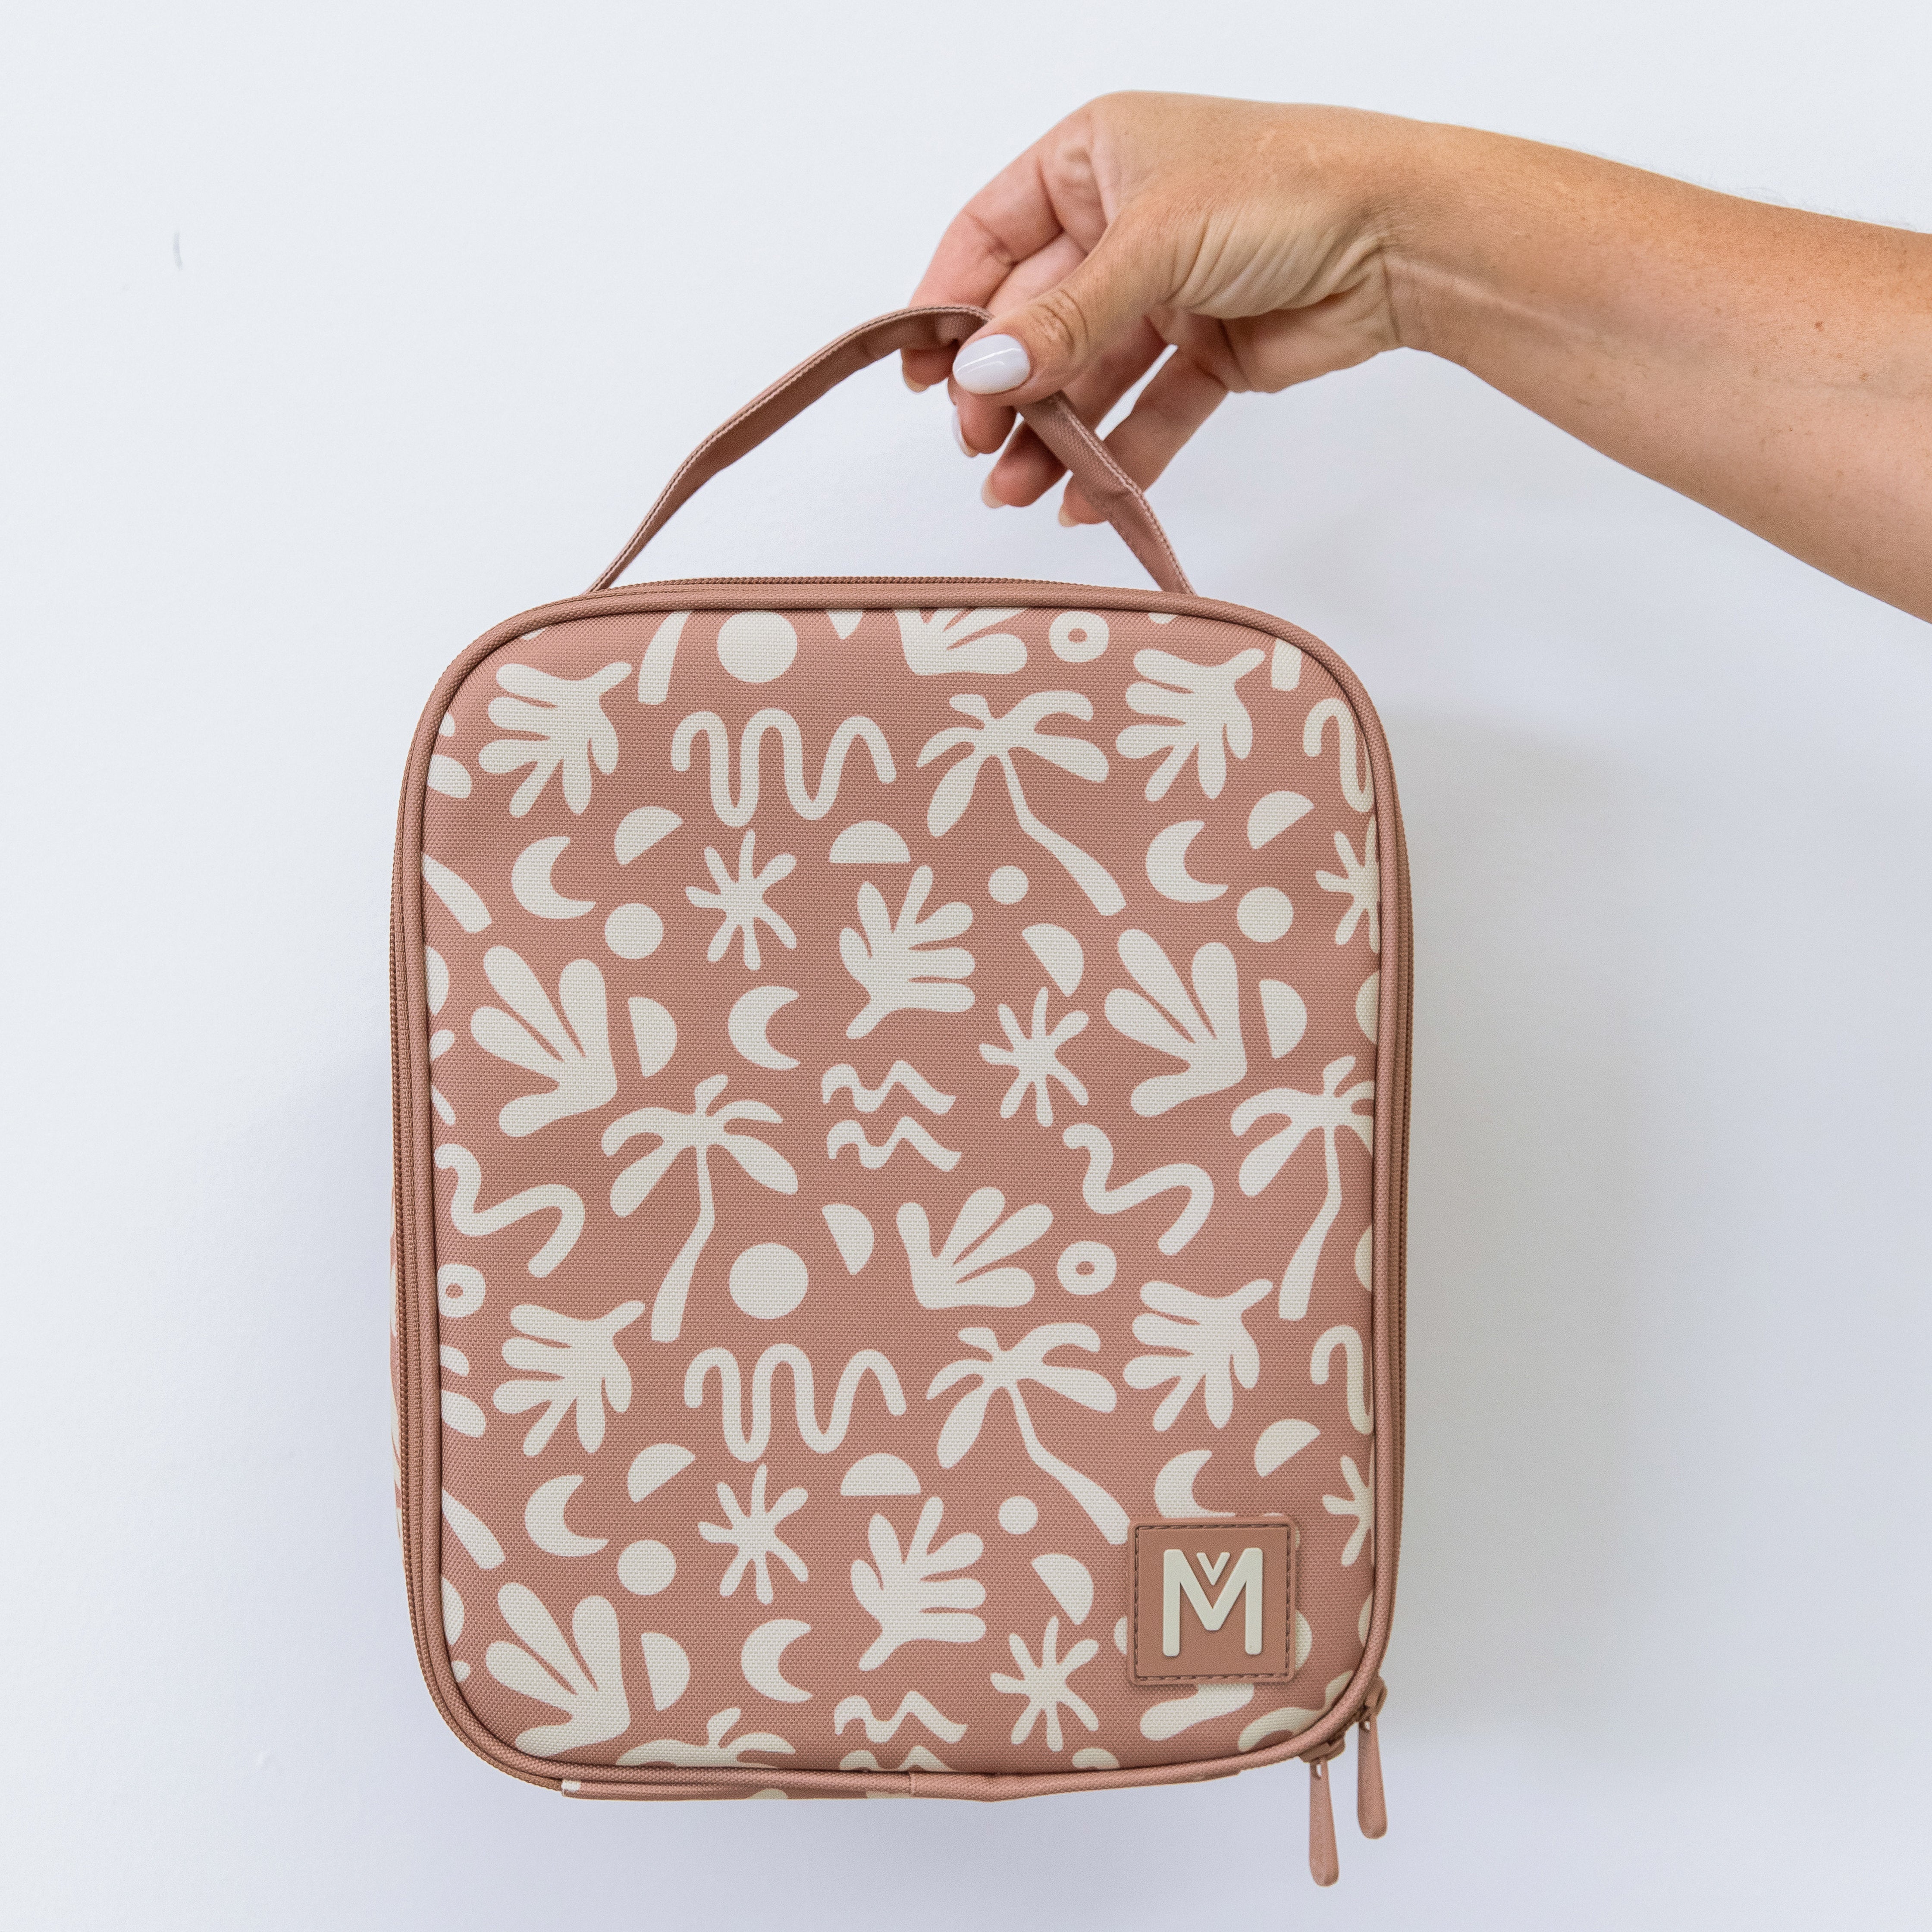 Montii Large Insulated Lunch Bag - Endless Summer